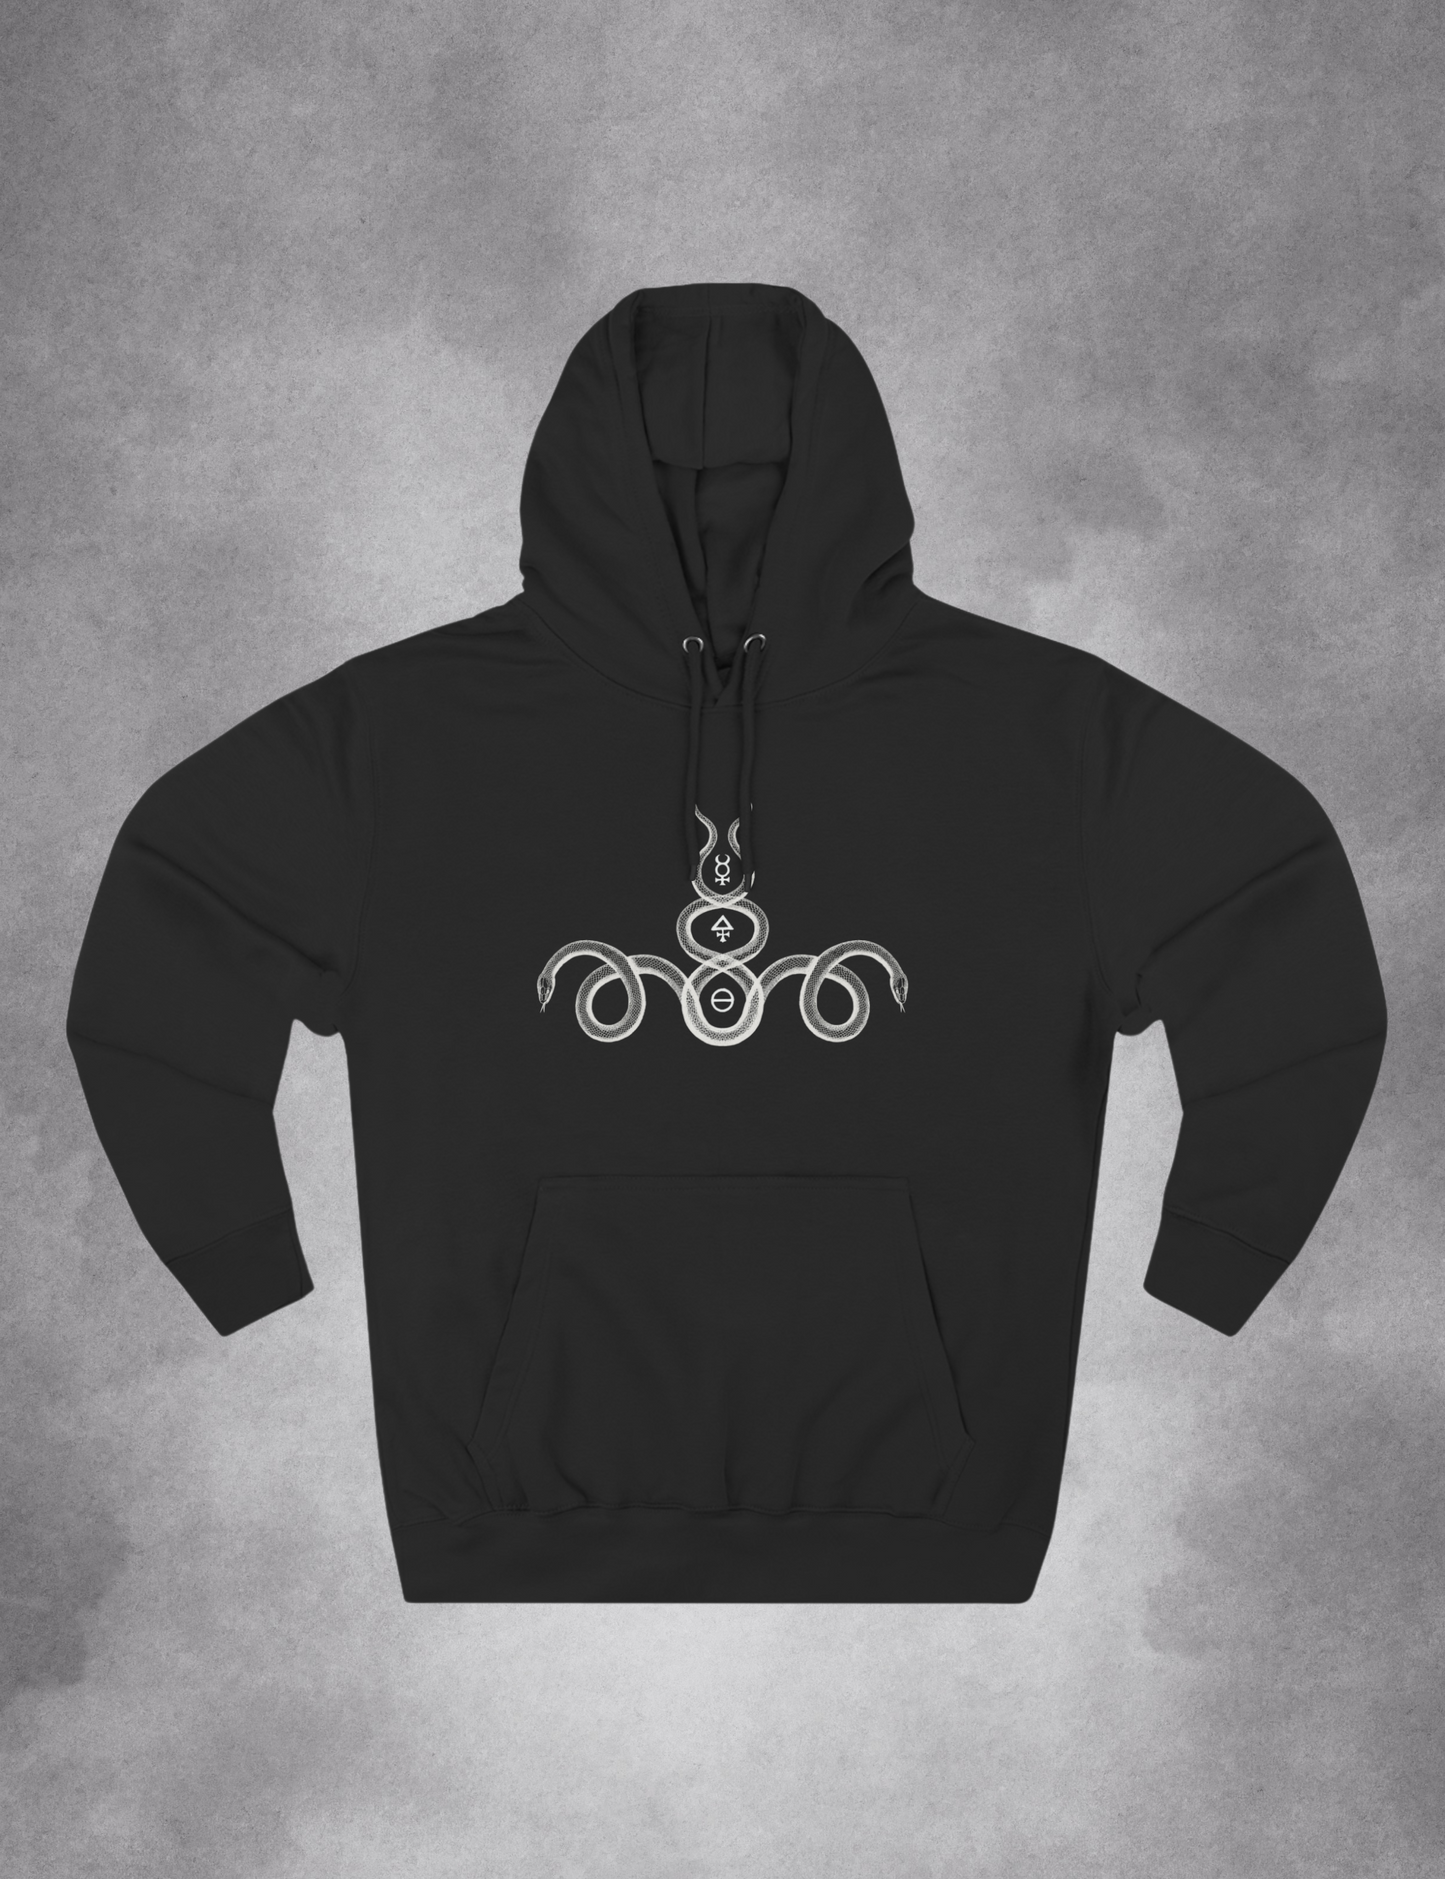 Alchemy Occult Snake Magnum Opus Plus Size Goth Witchy Esoteric Hoodie